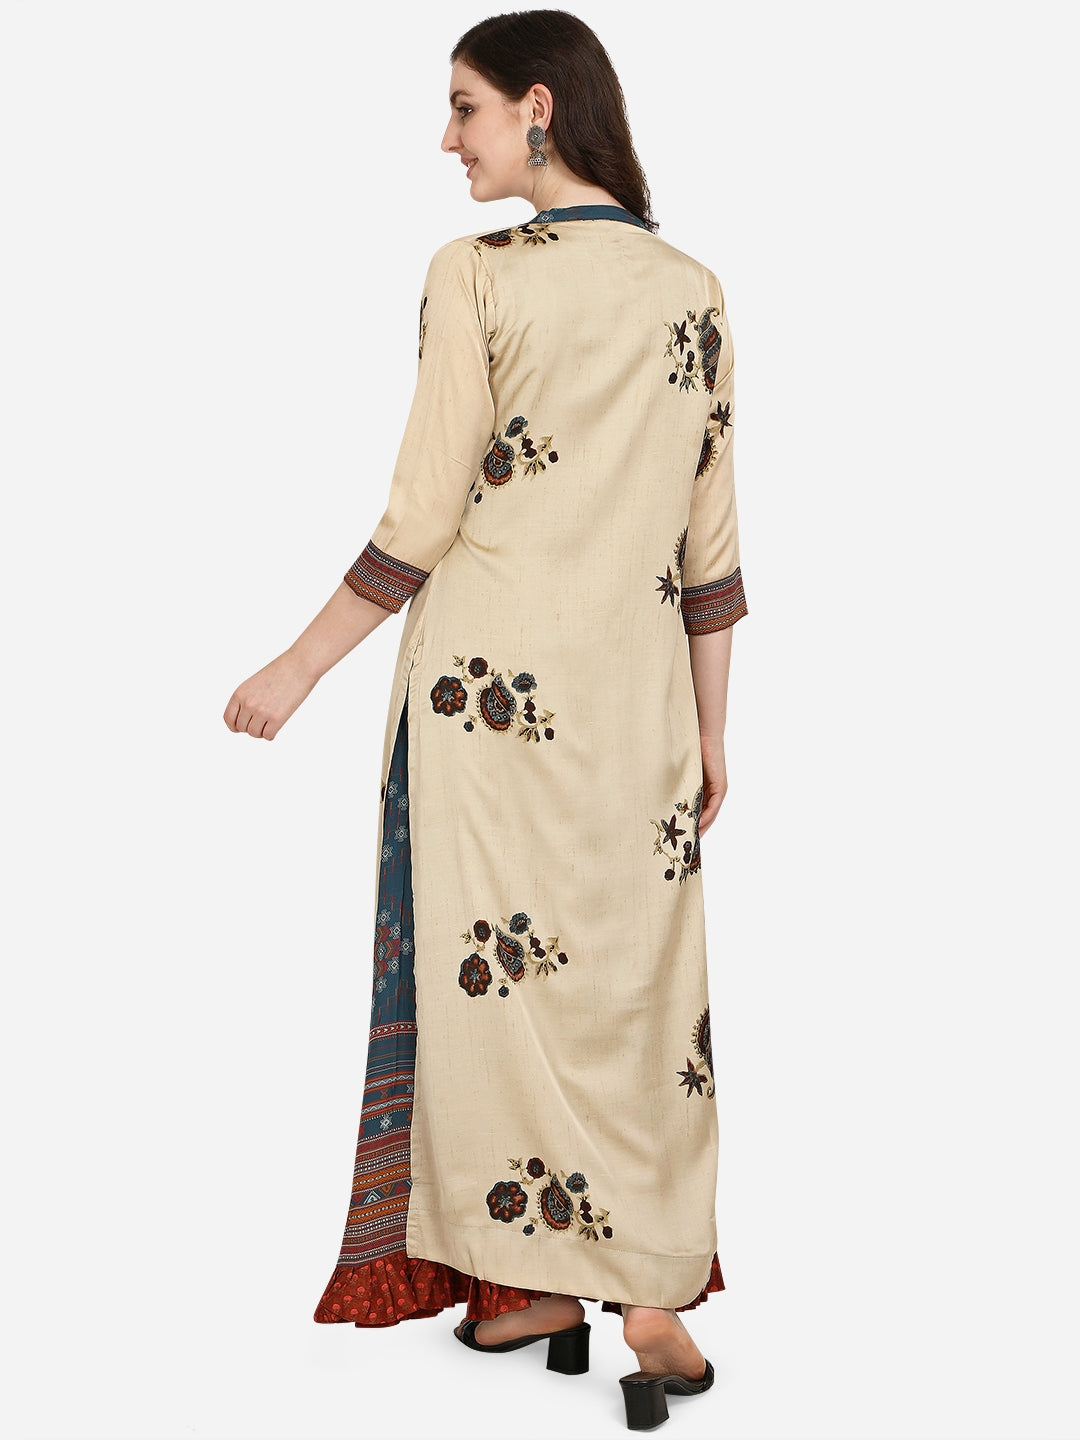 Women's Multi Color Blend Cotton Printed Gown And Jacket Ad-3006 - Navyaa